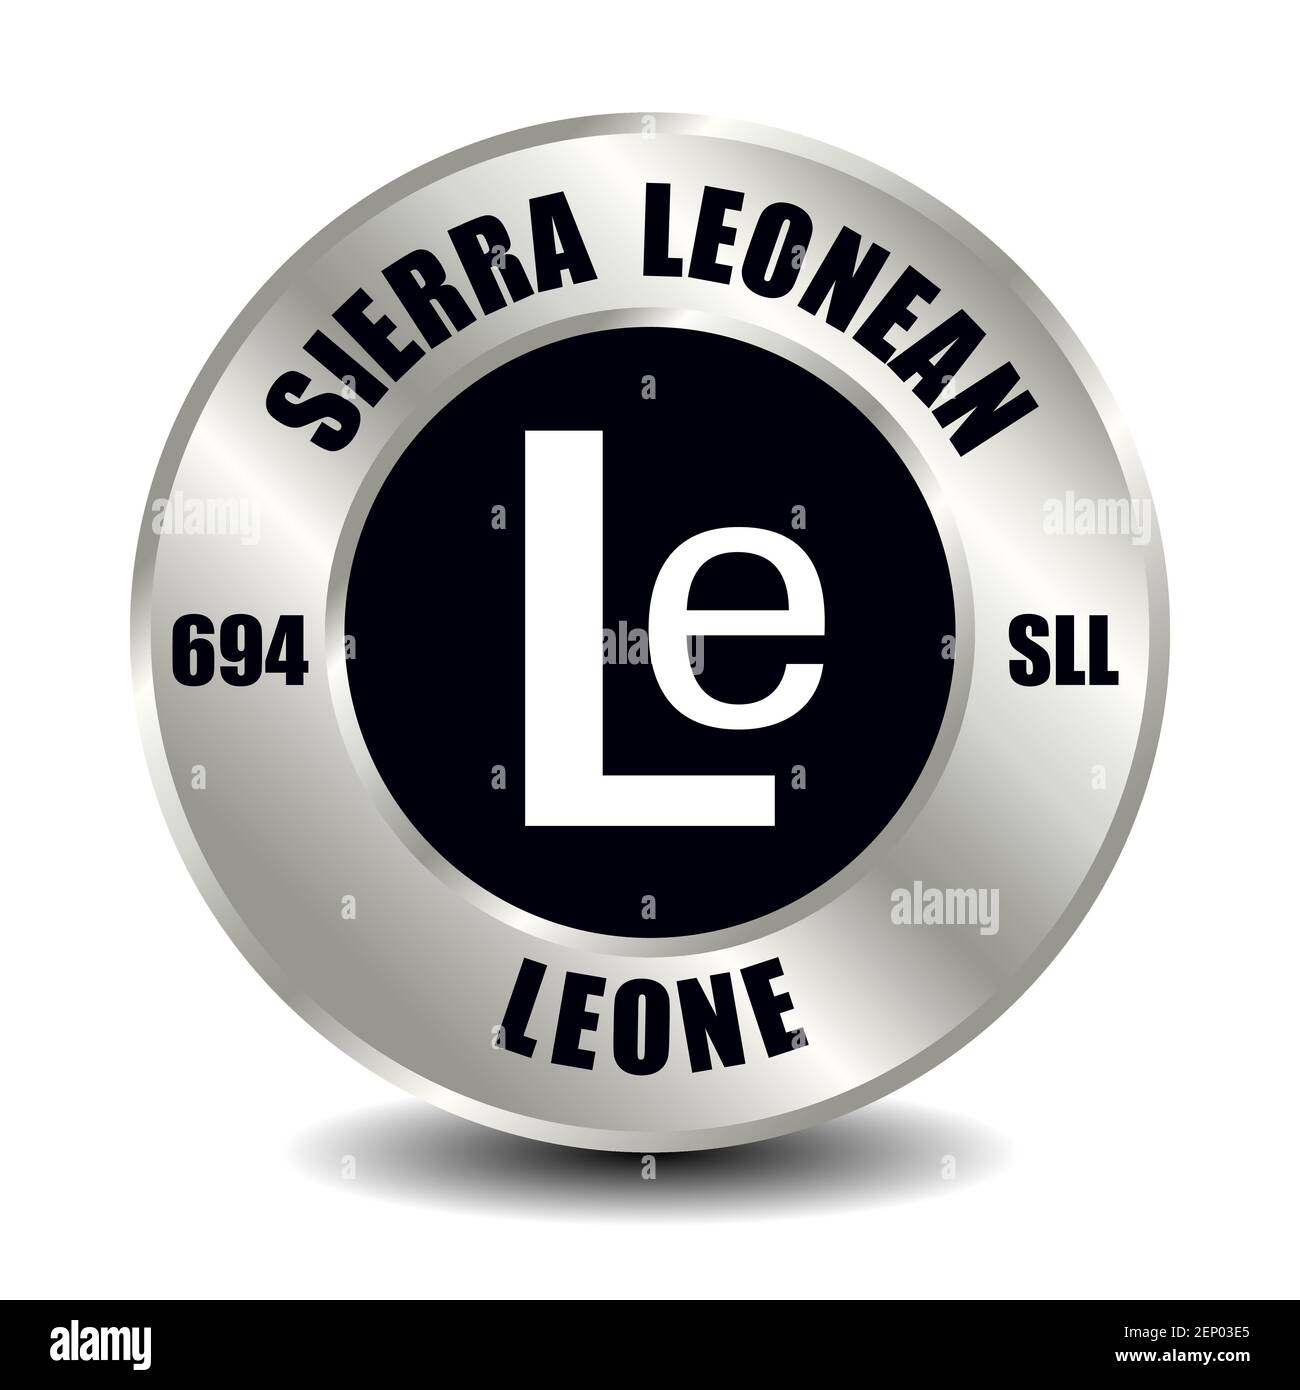 Sierra Leone money icon isolated on round silver coin. Vector sign of currency symbol with international ISO code and abbreviation Stock Vector